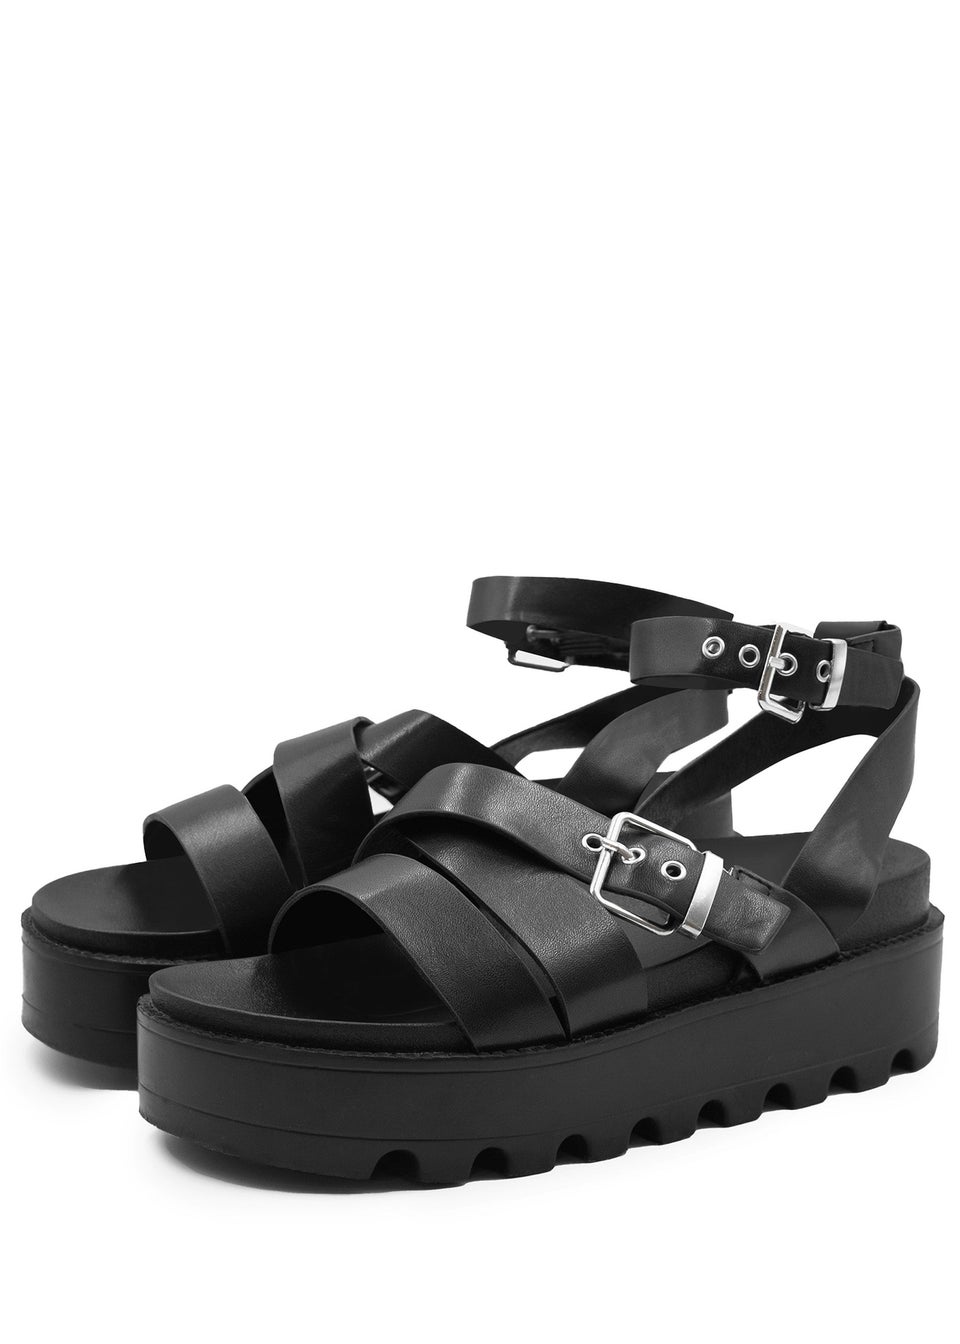 Where's That From Black Pu Layla Buckle Strap Platform Sandals